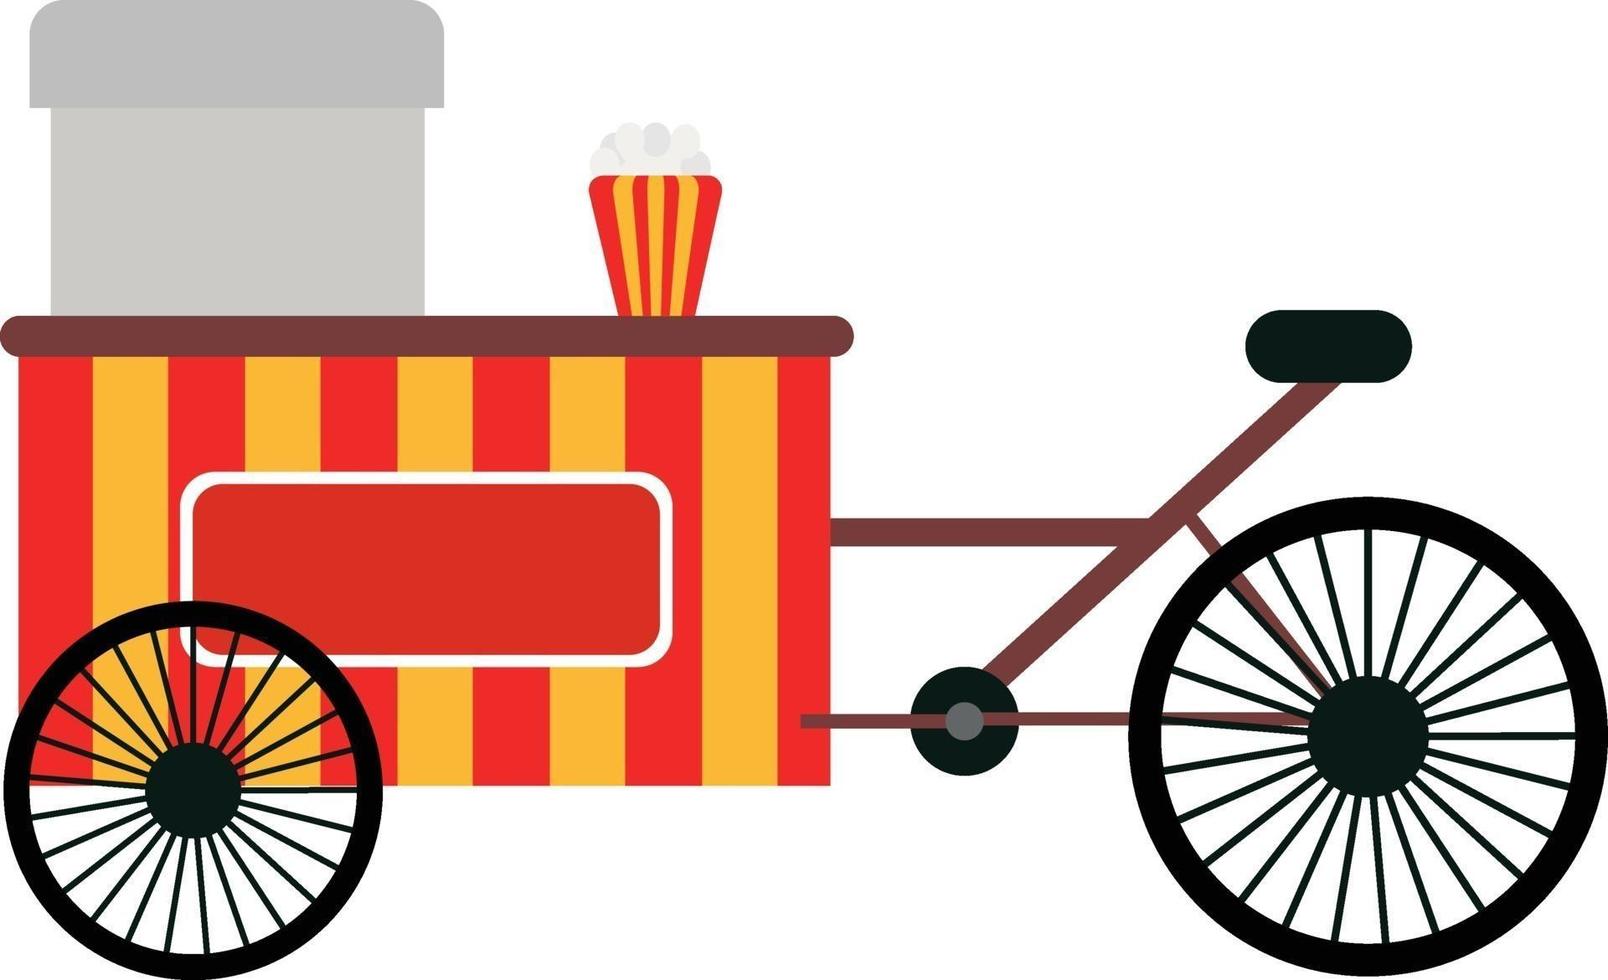 Popcorn stand, illustration, vector on a white background.